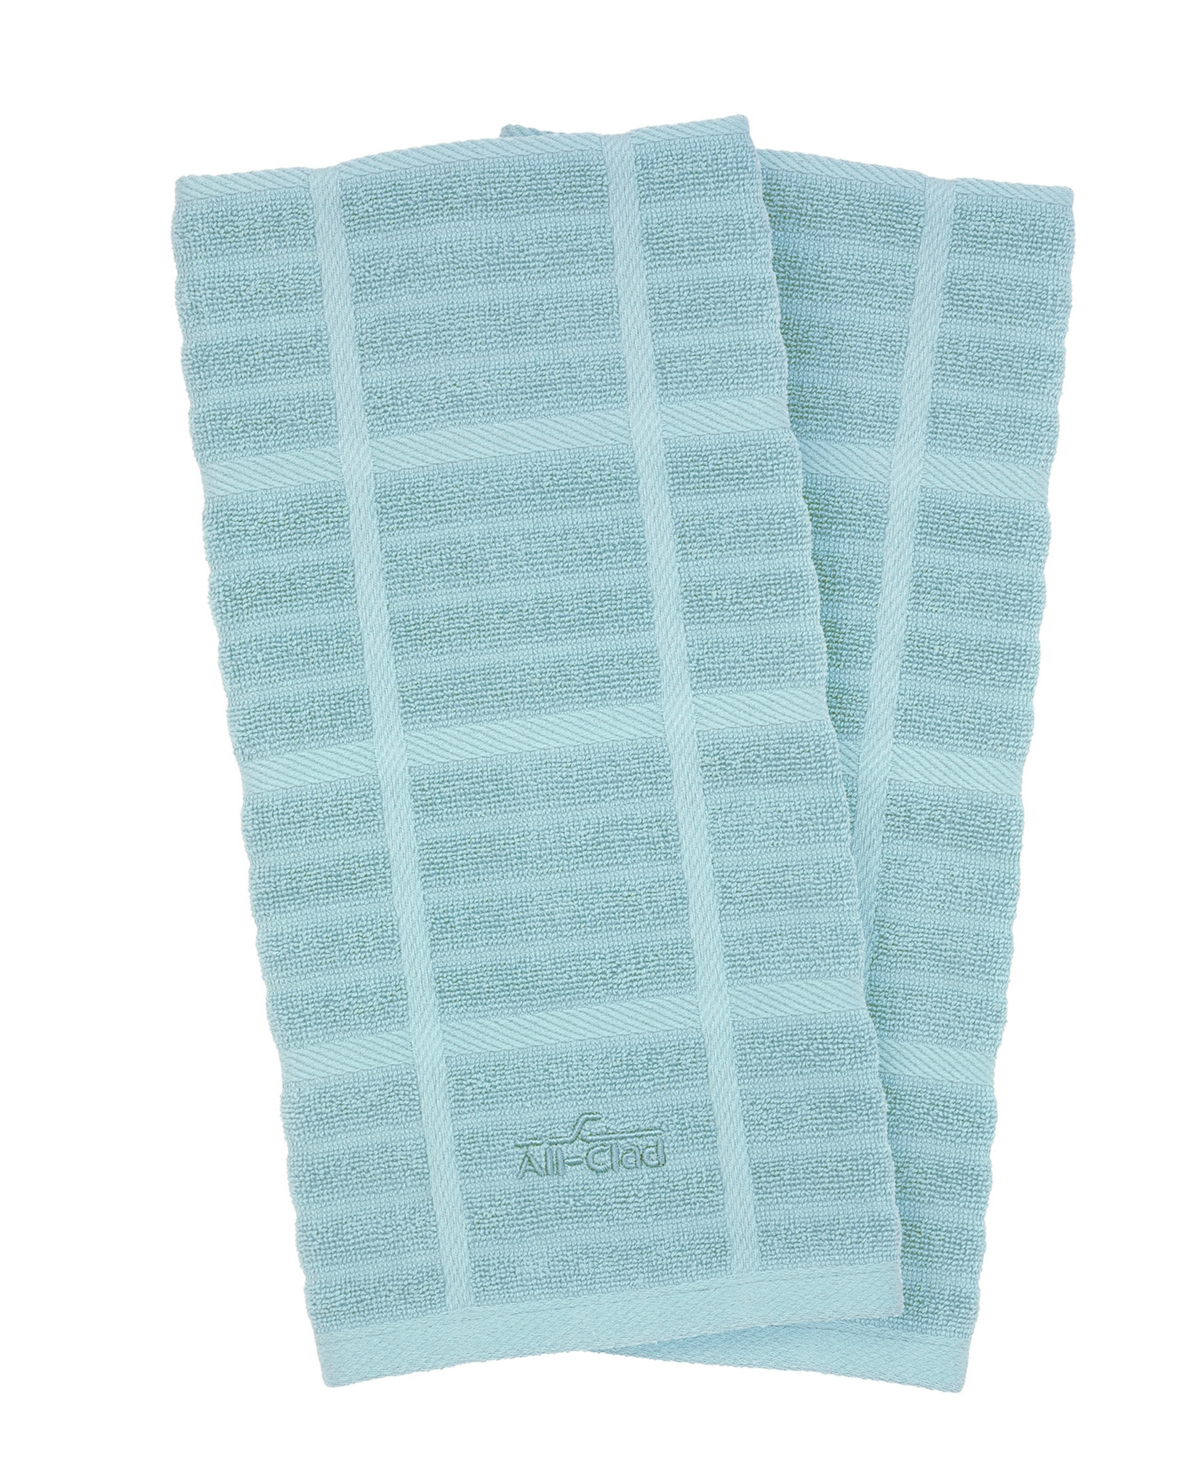 All-clad Solid Kitchen Towel Set Of 2 In Rainfall